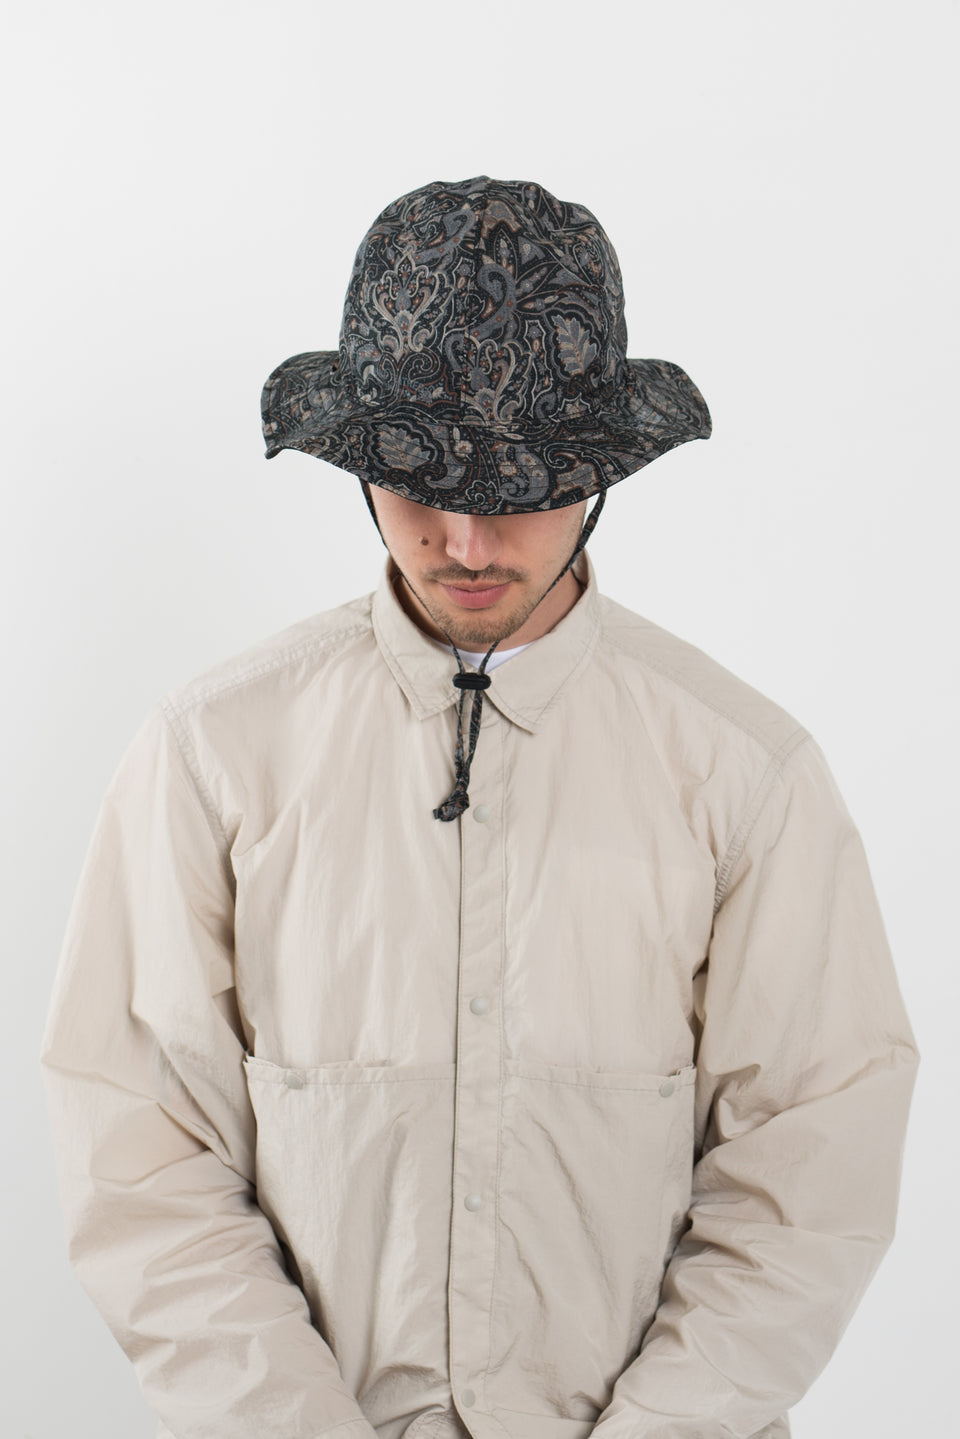 Found Feather SS22 Japan Reversible Military Sun Hat Yoryu Black / Paisley Calculus Victoria BC Canada